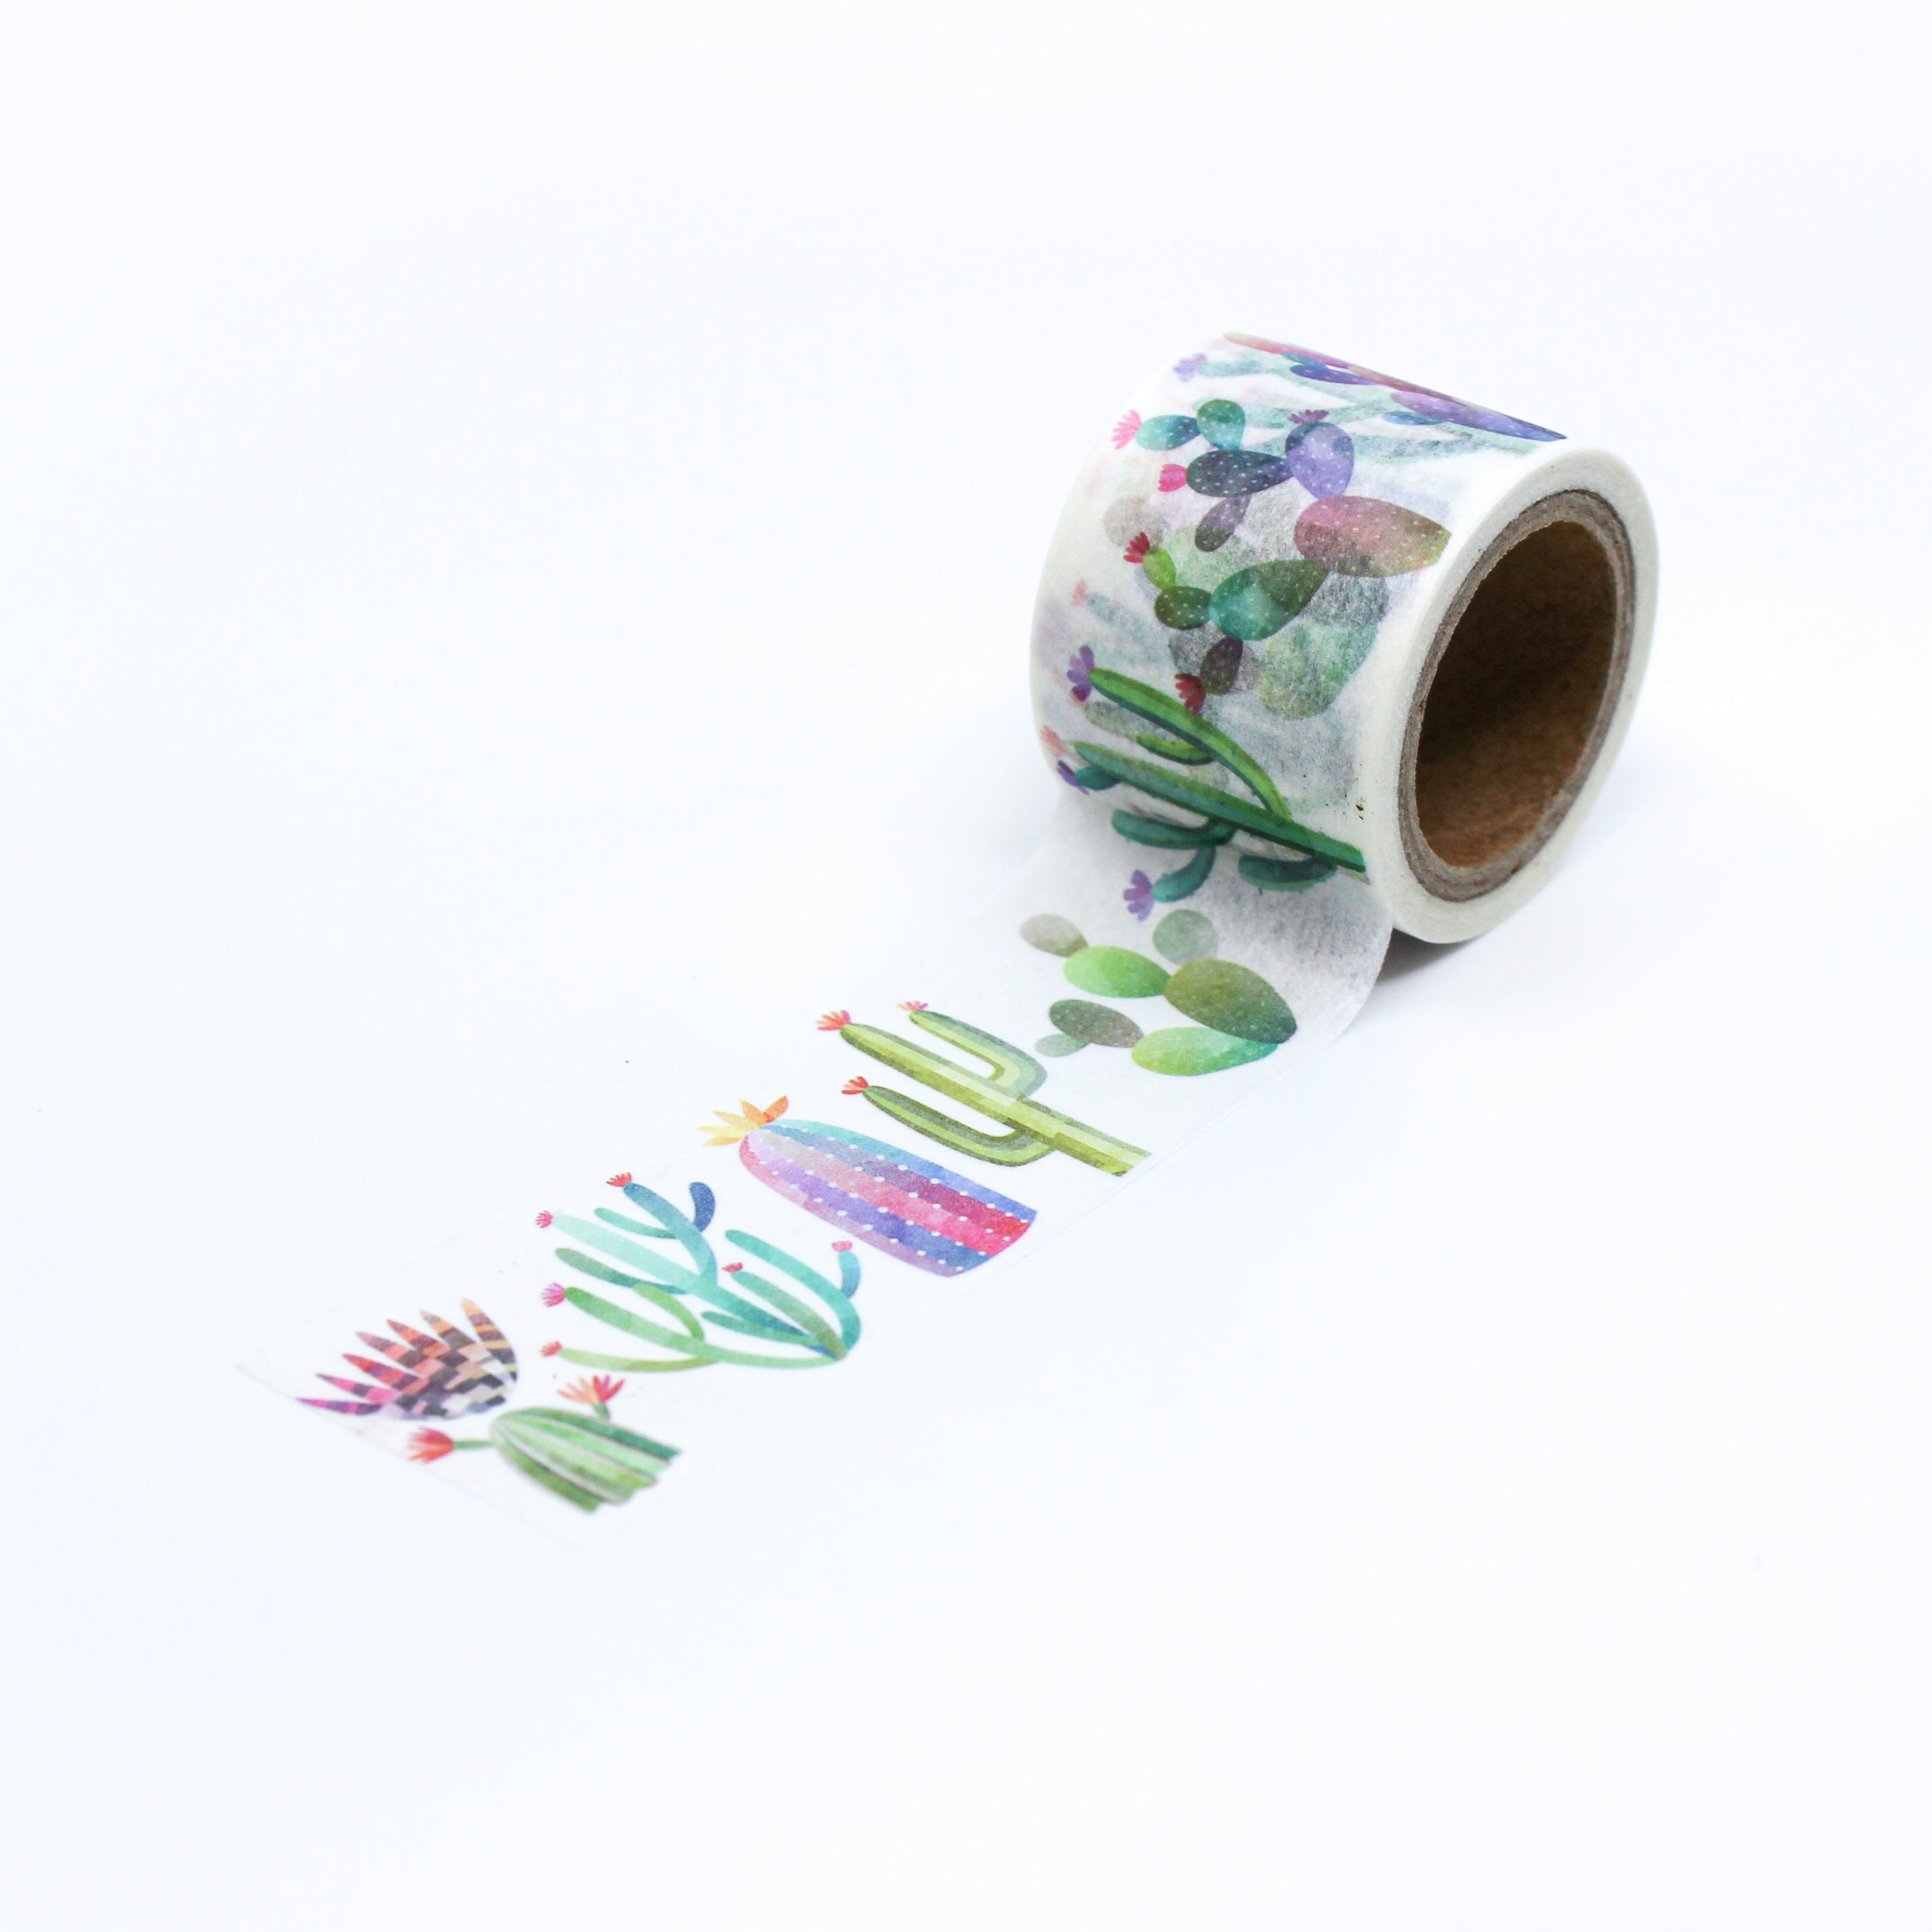 This is a repeat full view of pretty multi-color succulent pattern washi tape from BBB Supplies Craft Shop